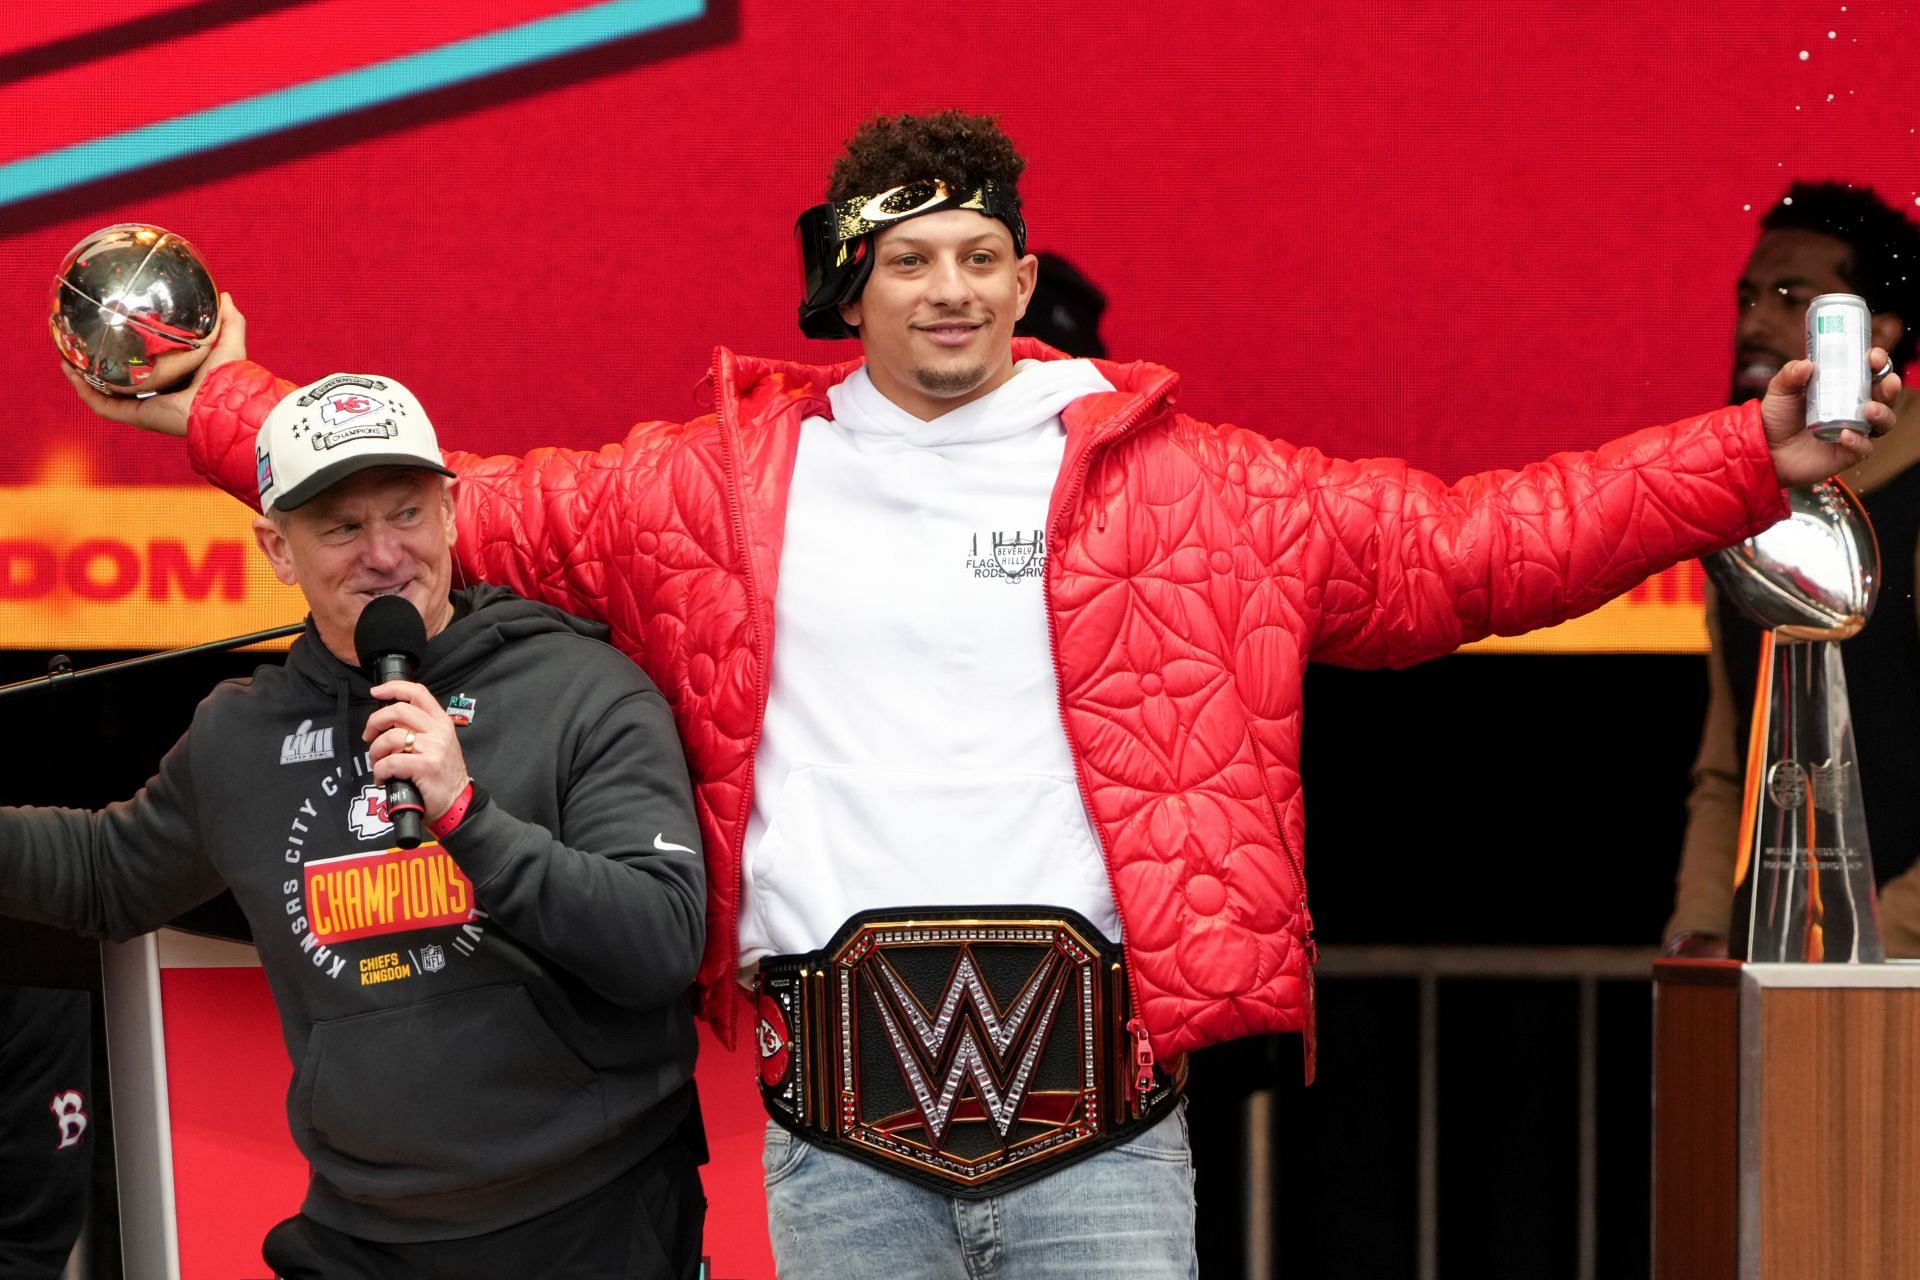 Mahomes is set to be one of the highest-paid QBs in the NFL in 2023